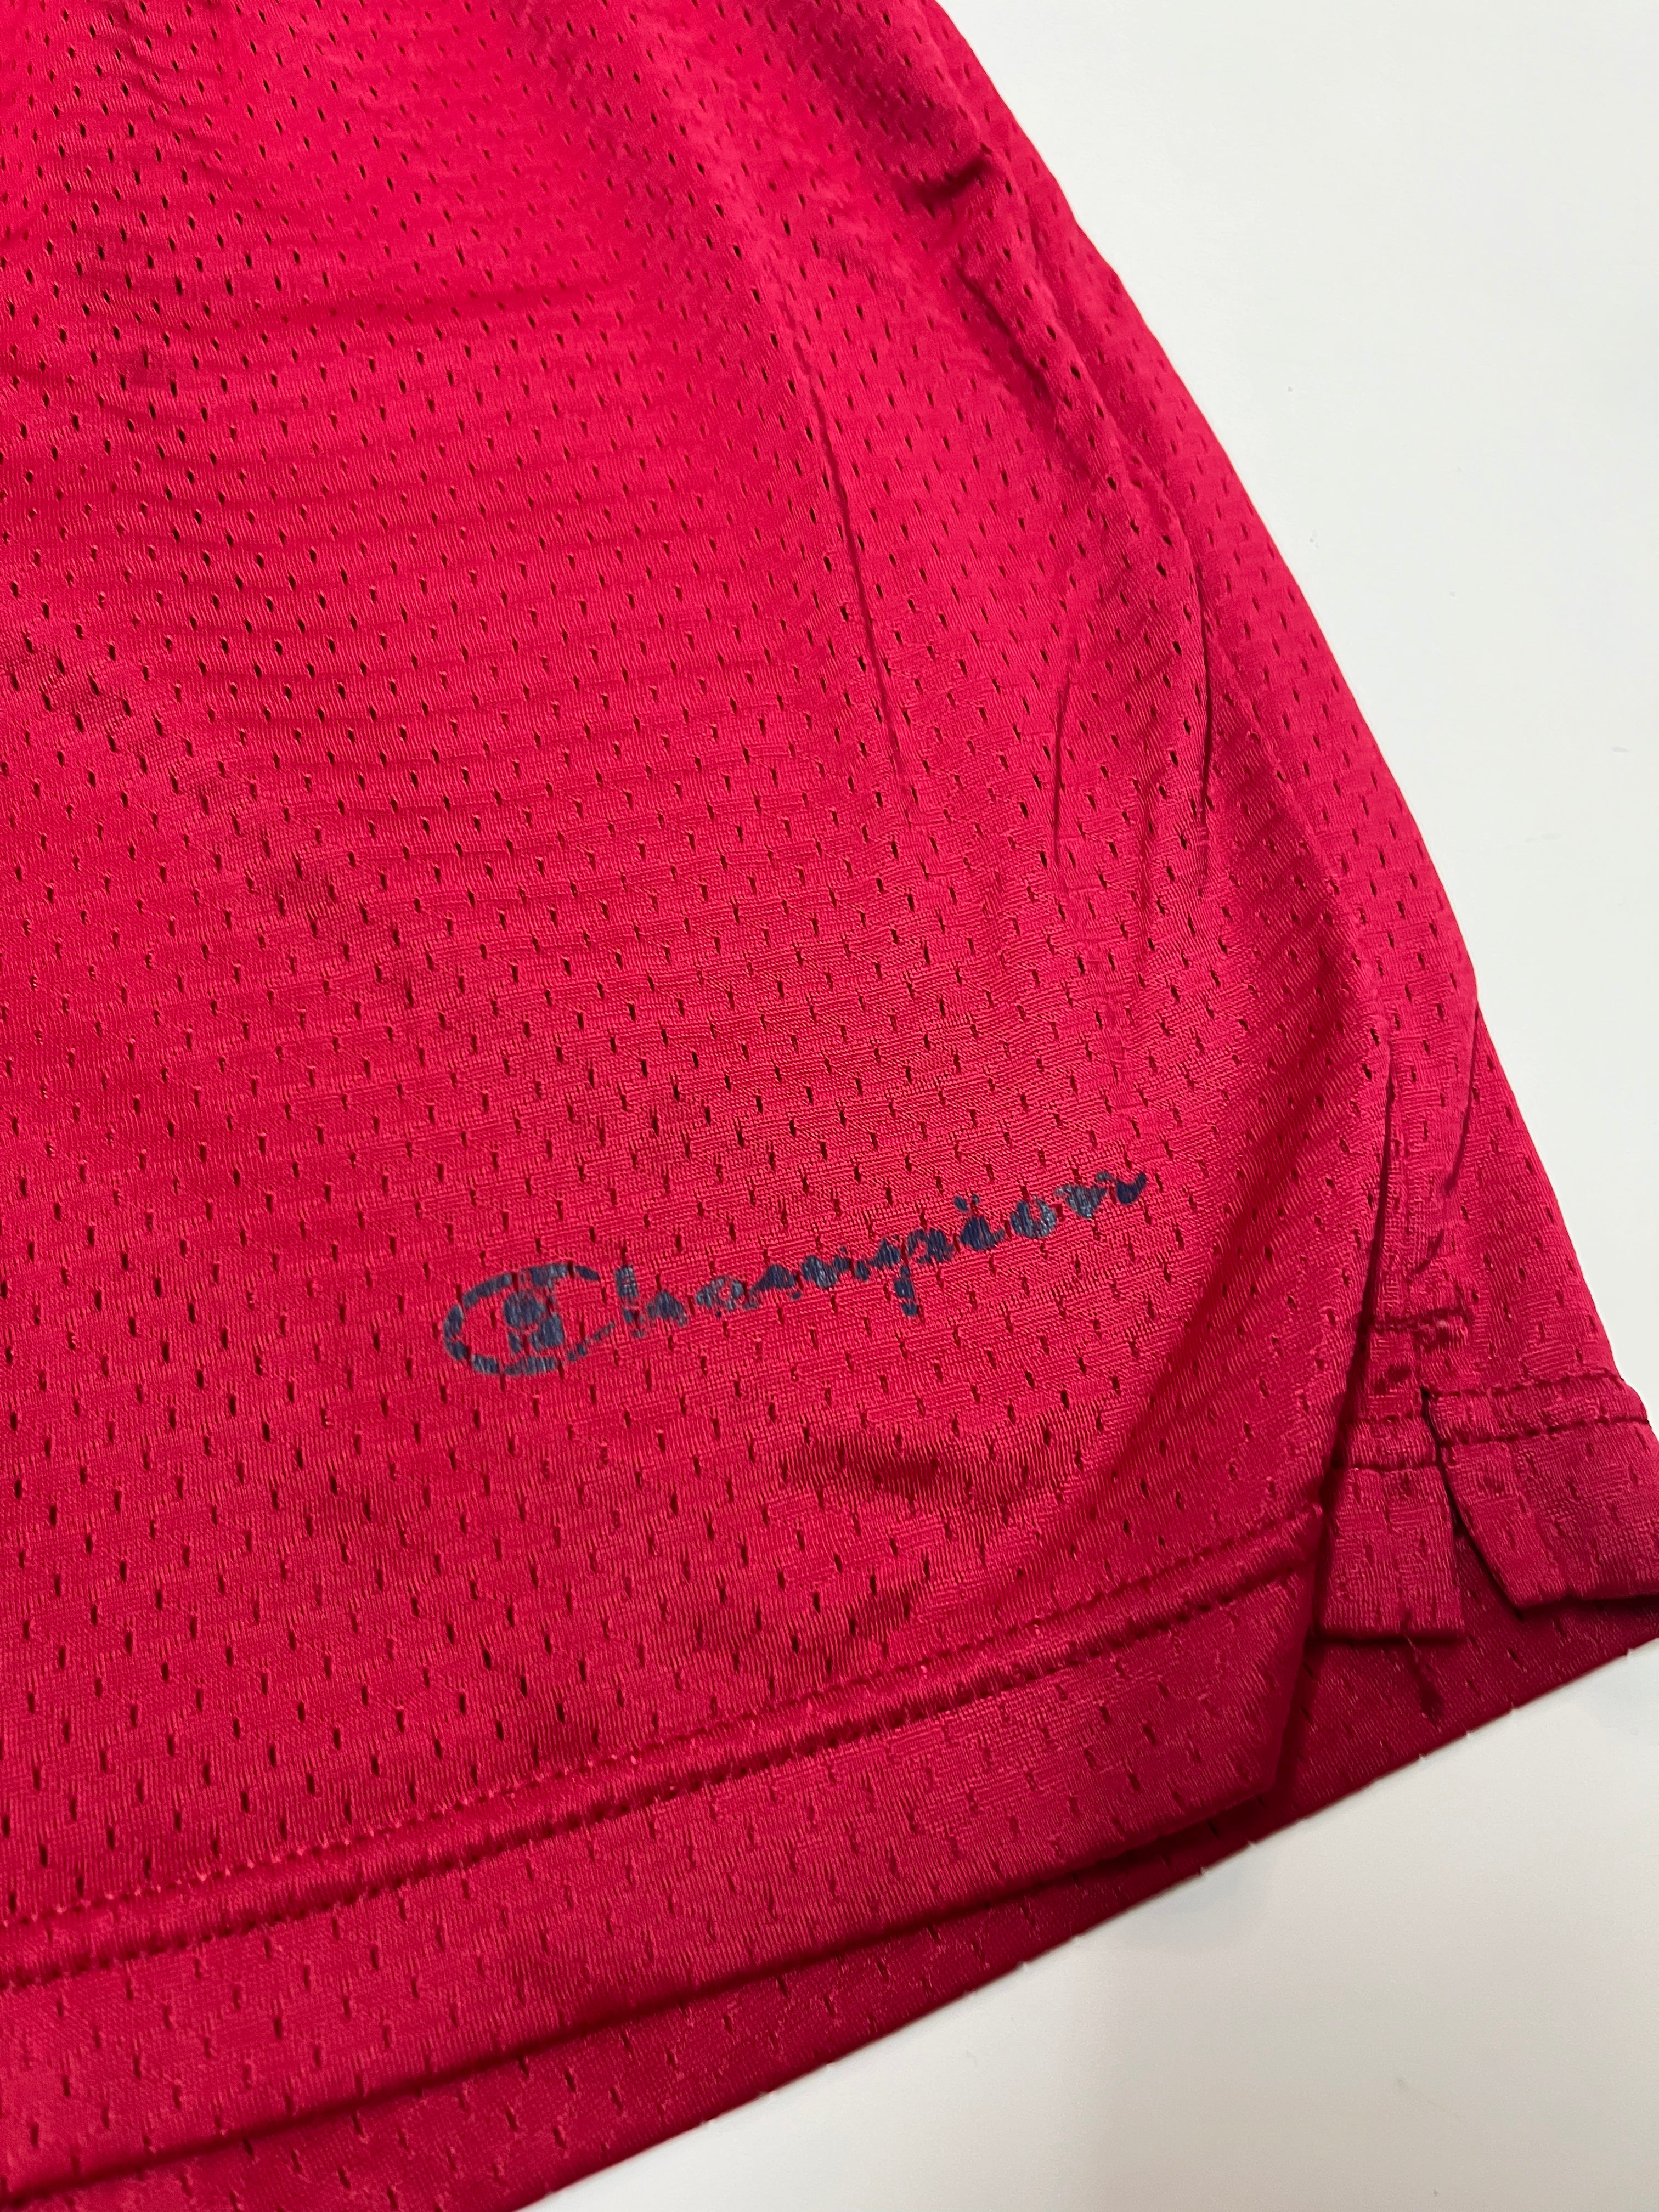 1980s Champion Mesh Shorts with Logo Patch - Team Red - S 29/30”